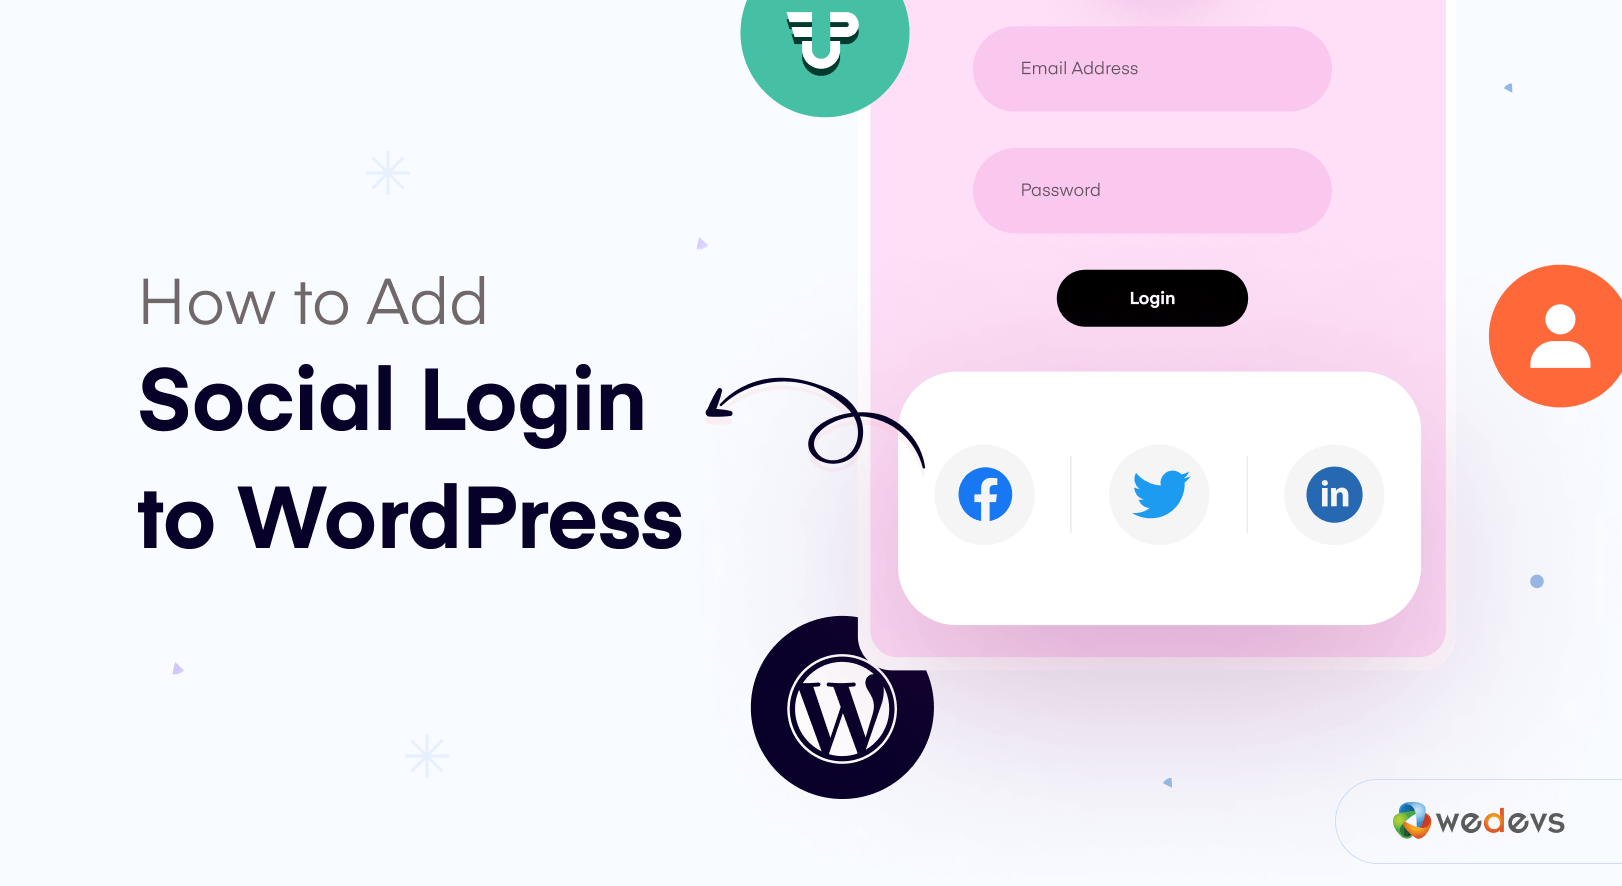 How to Add Social Login to WordPress for Higher User Engagement